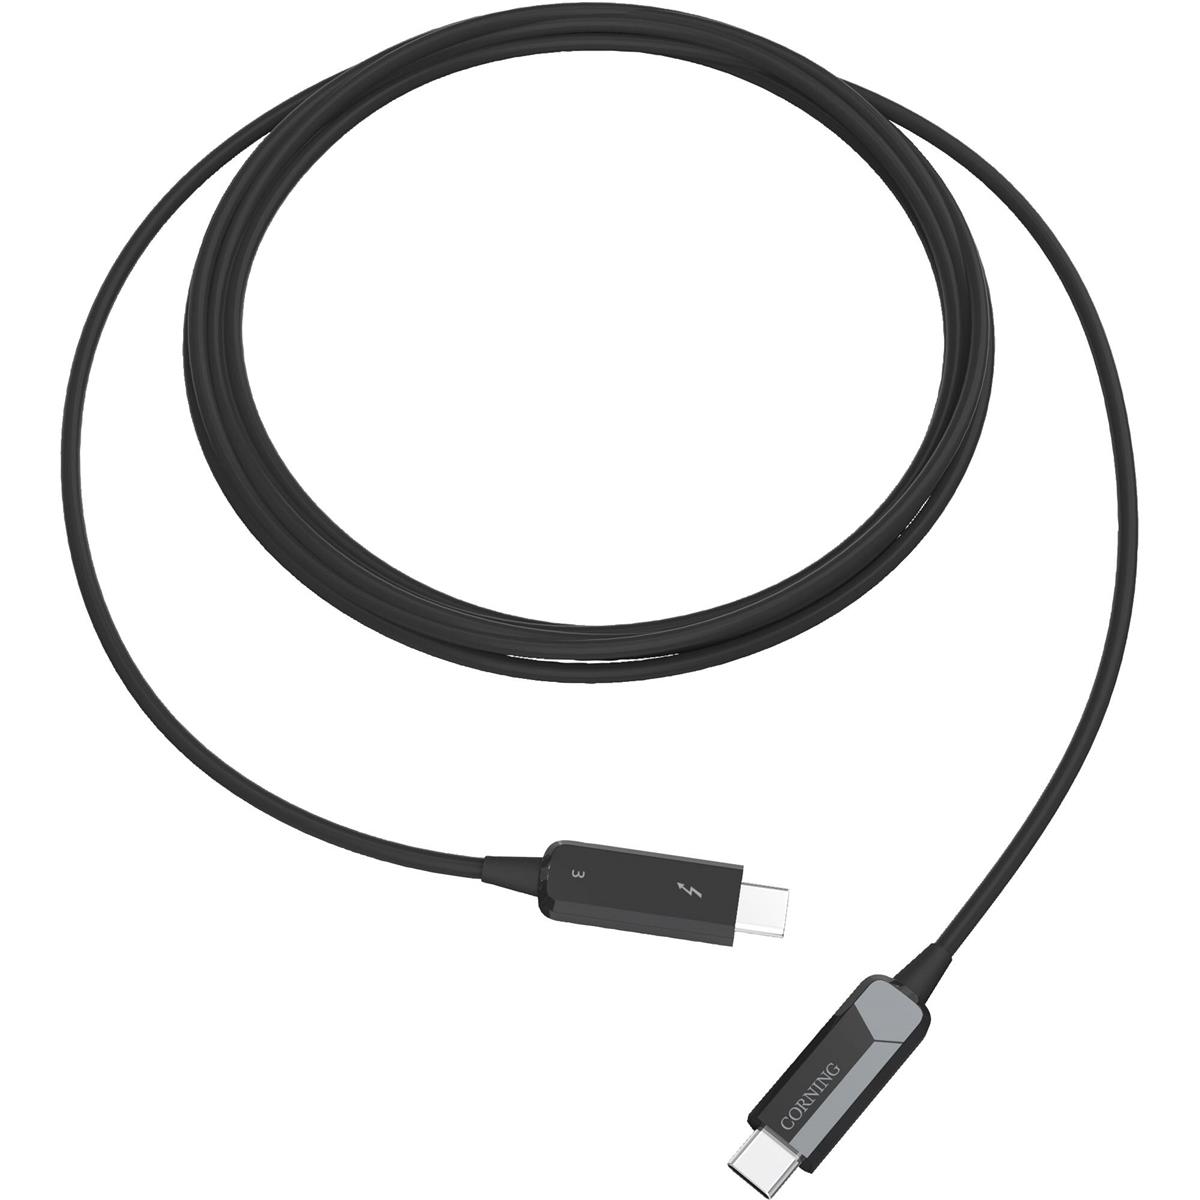 

Optical Cables by Corning Thunderbolt 3 USB Type-C Male Optical Cable, 10m